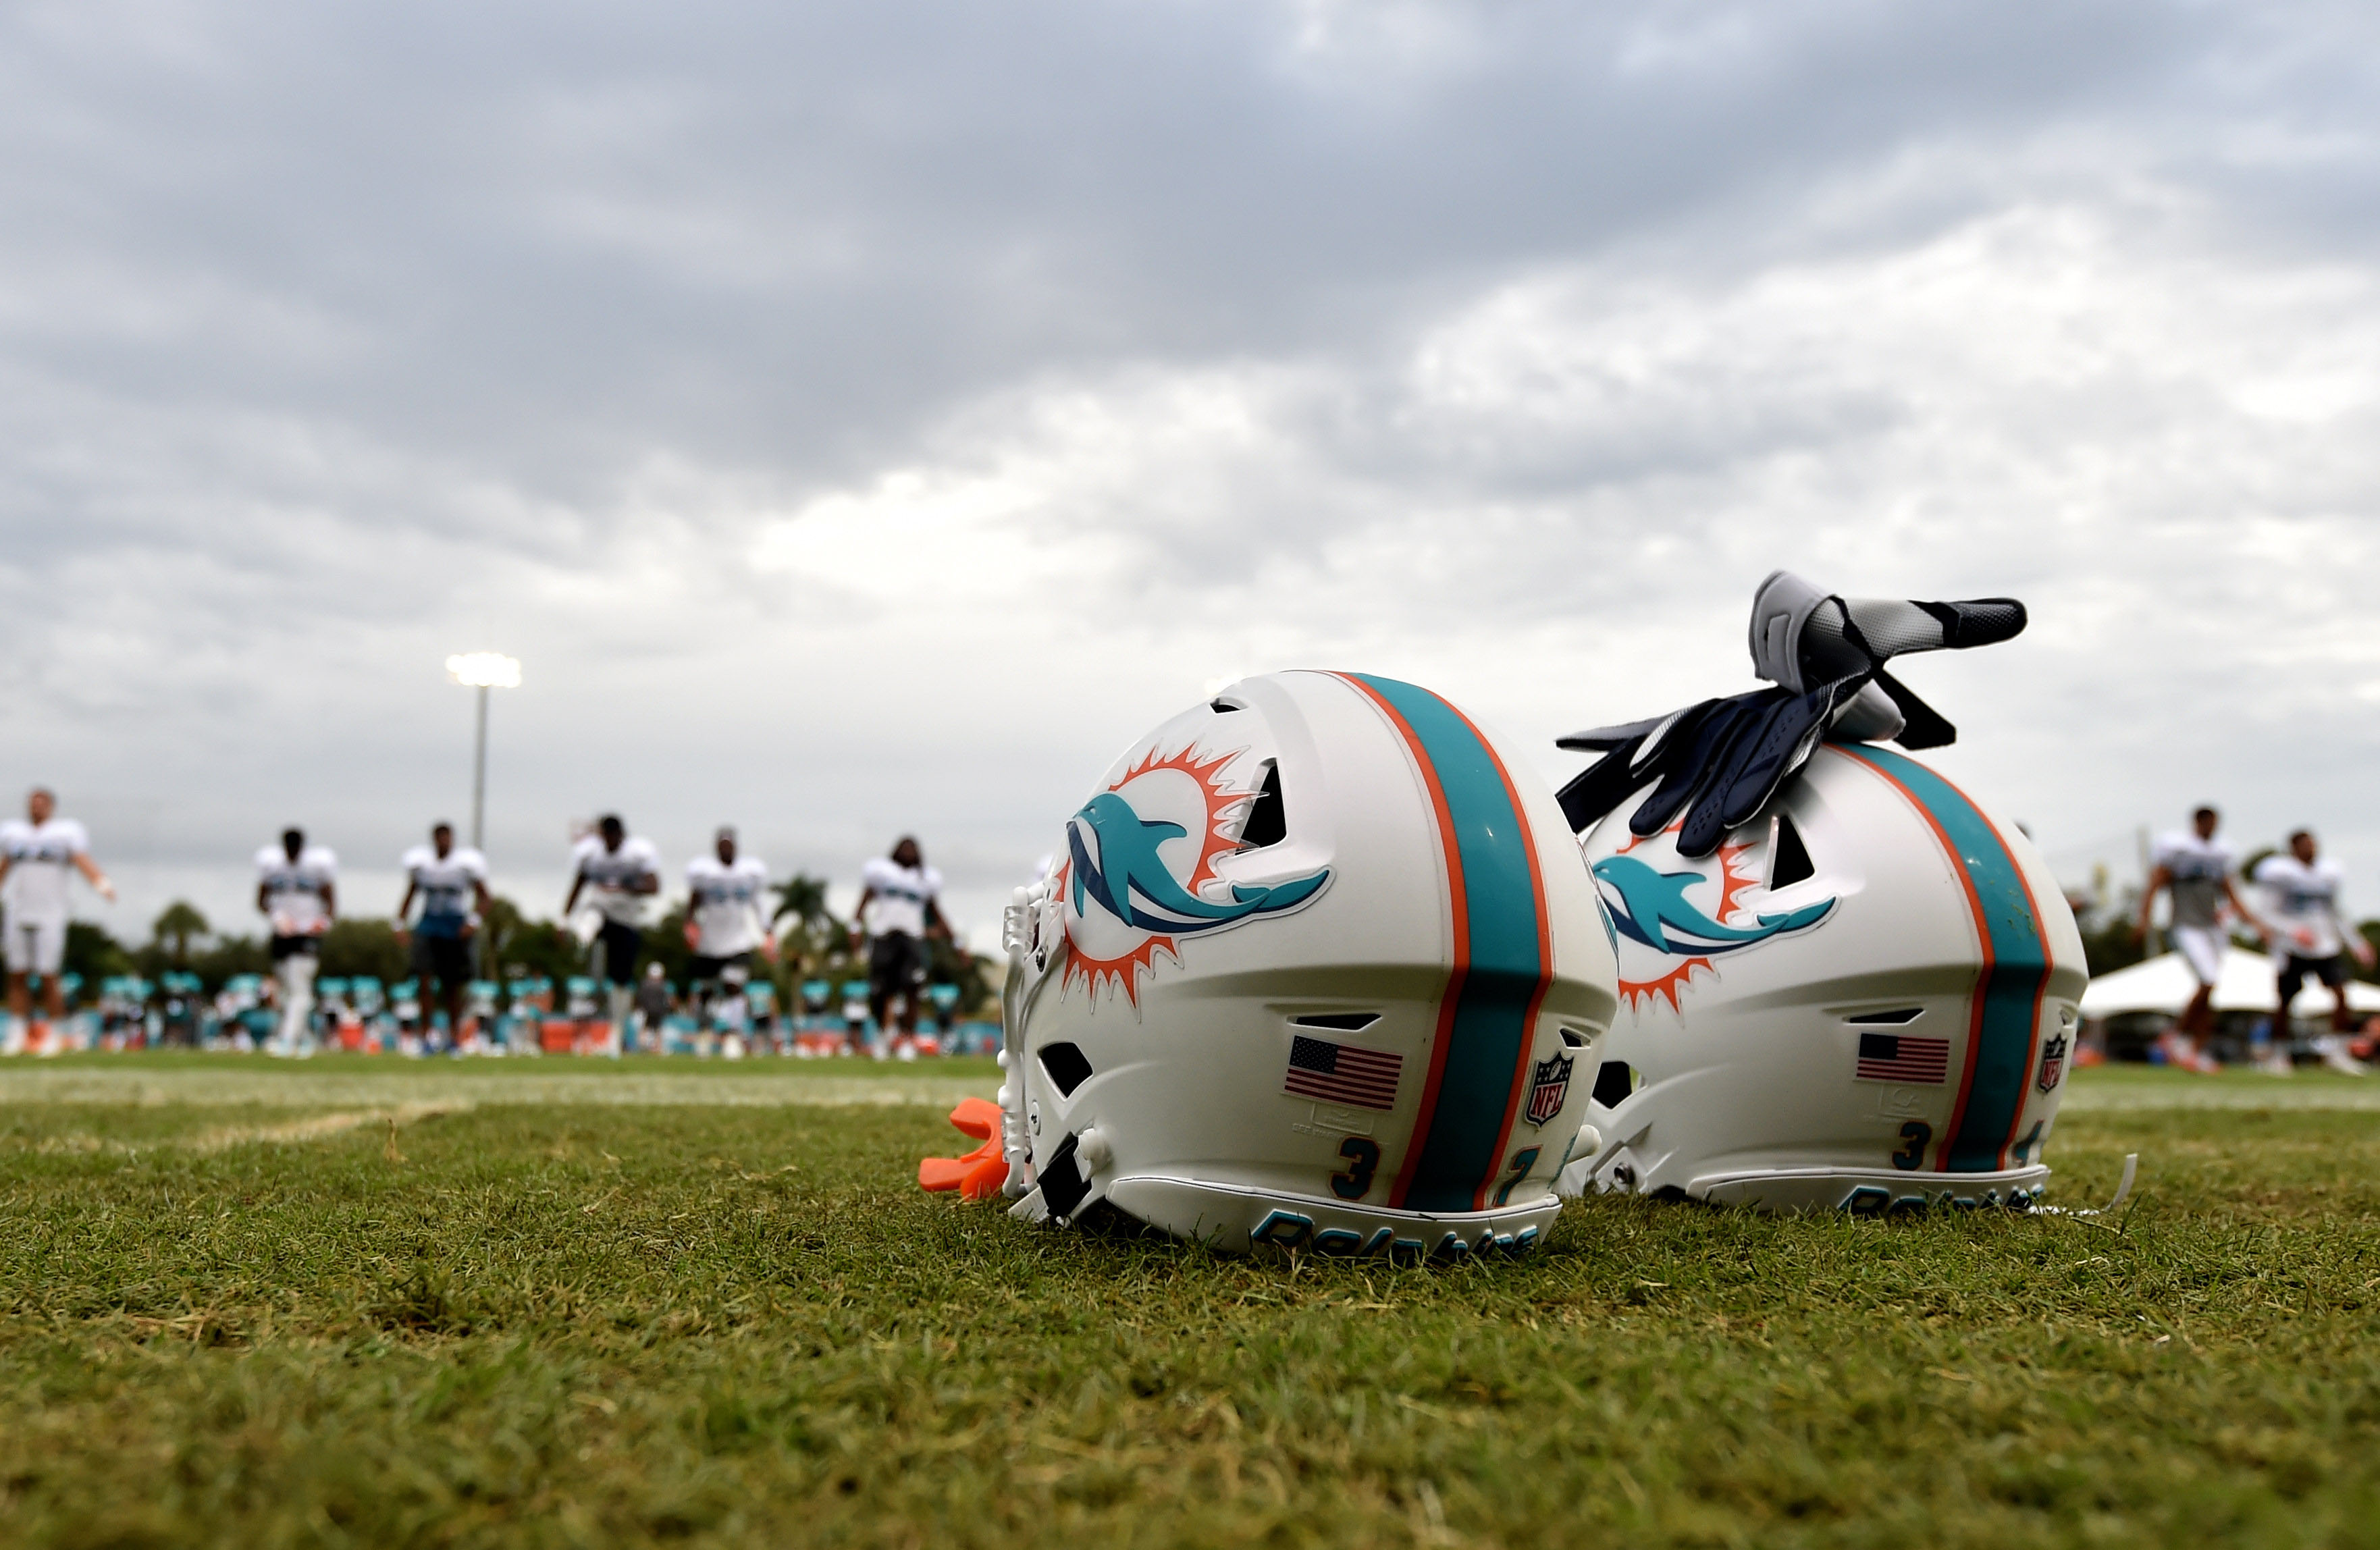 Phins News NFL Miami DolphinsTraining Camp